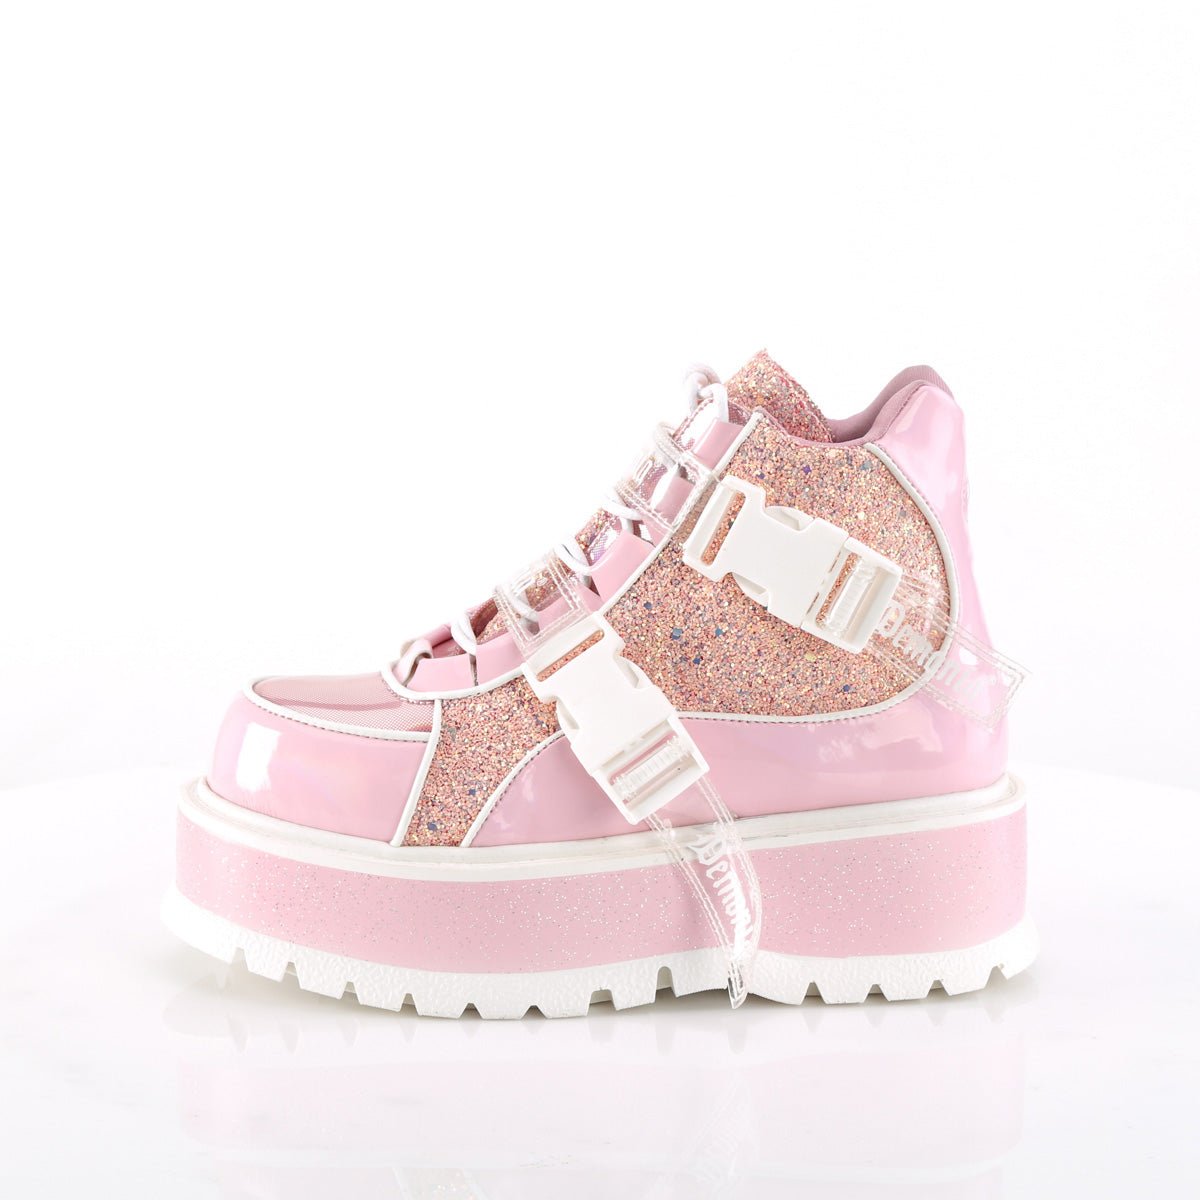 Too Fast | Demonia Slacker 50 | Baby Pink Patent Leather & Glitter Women's Ankle Boots